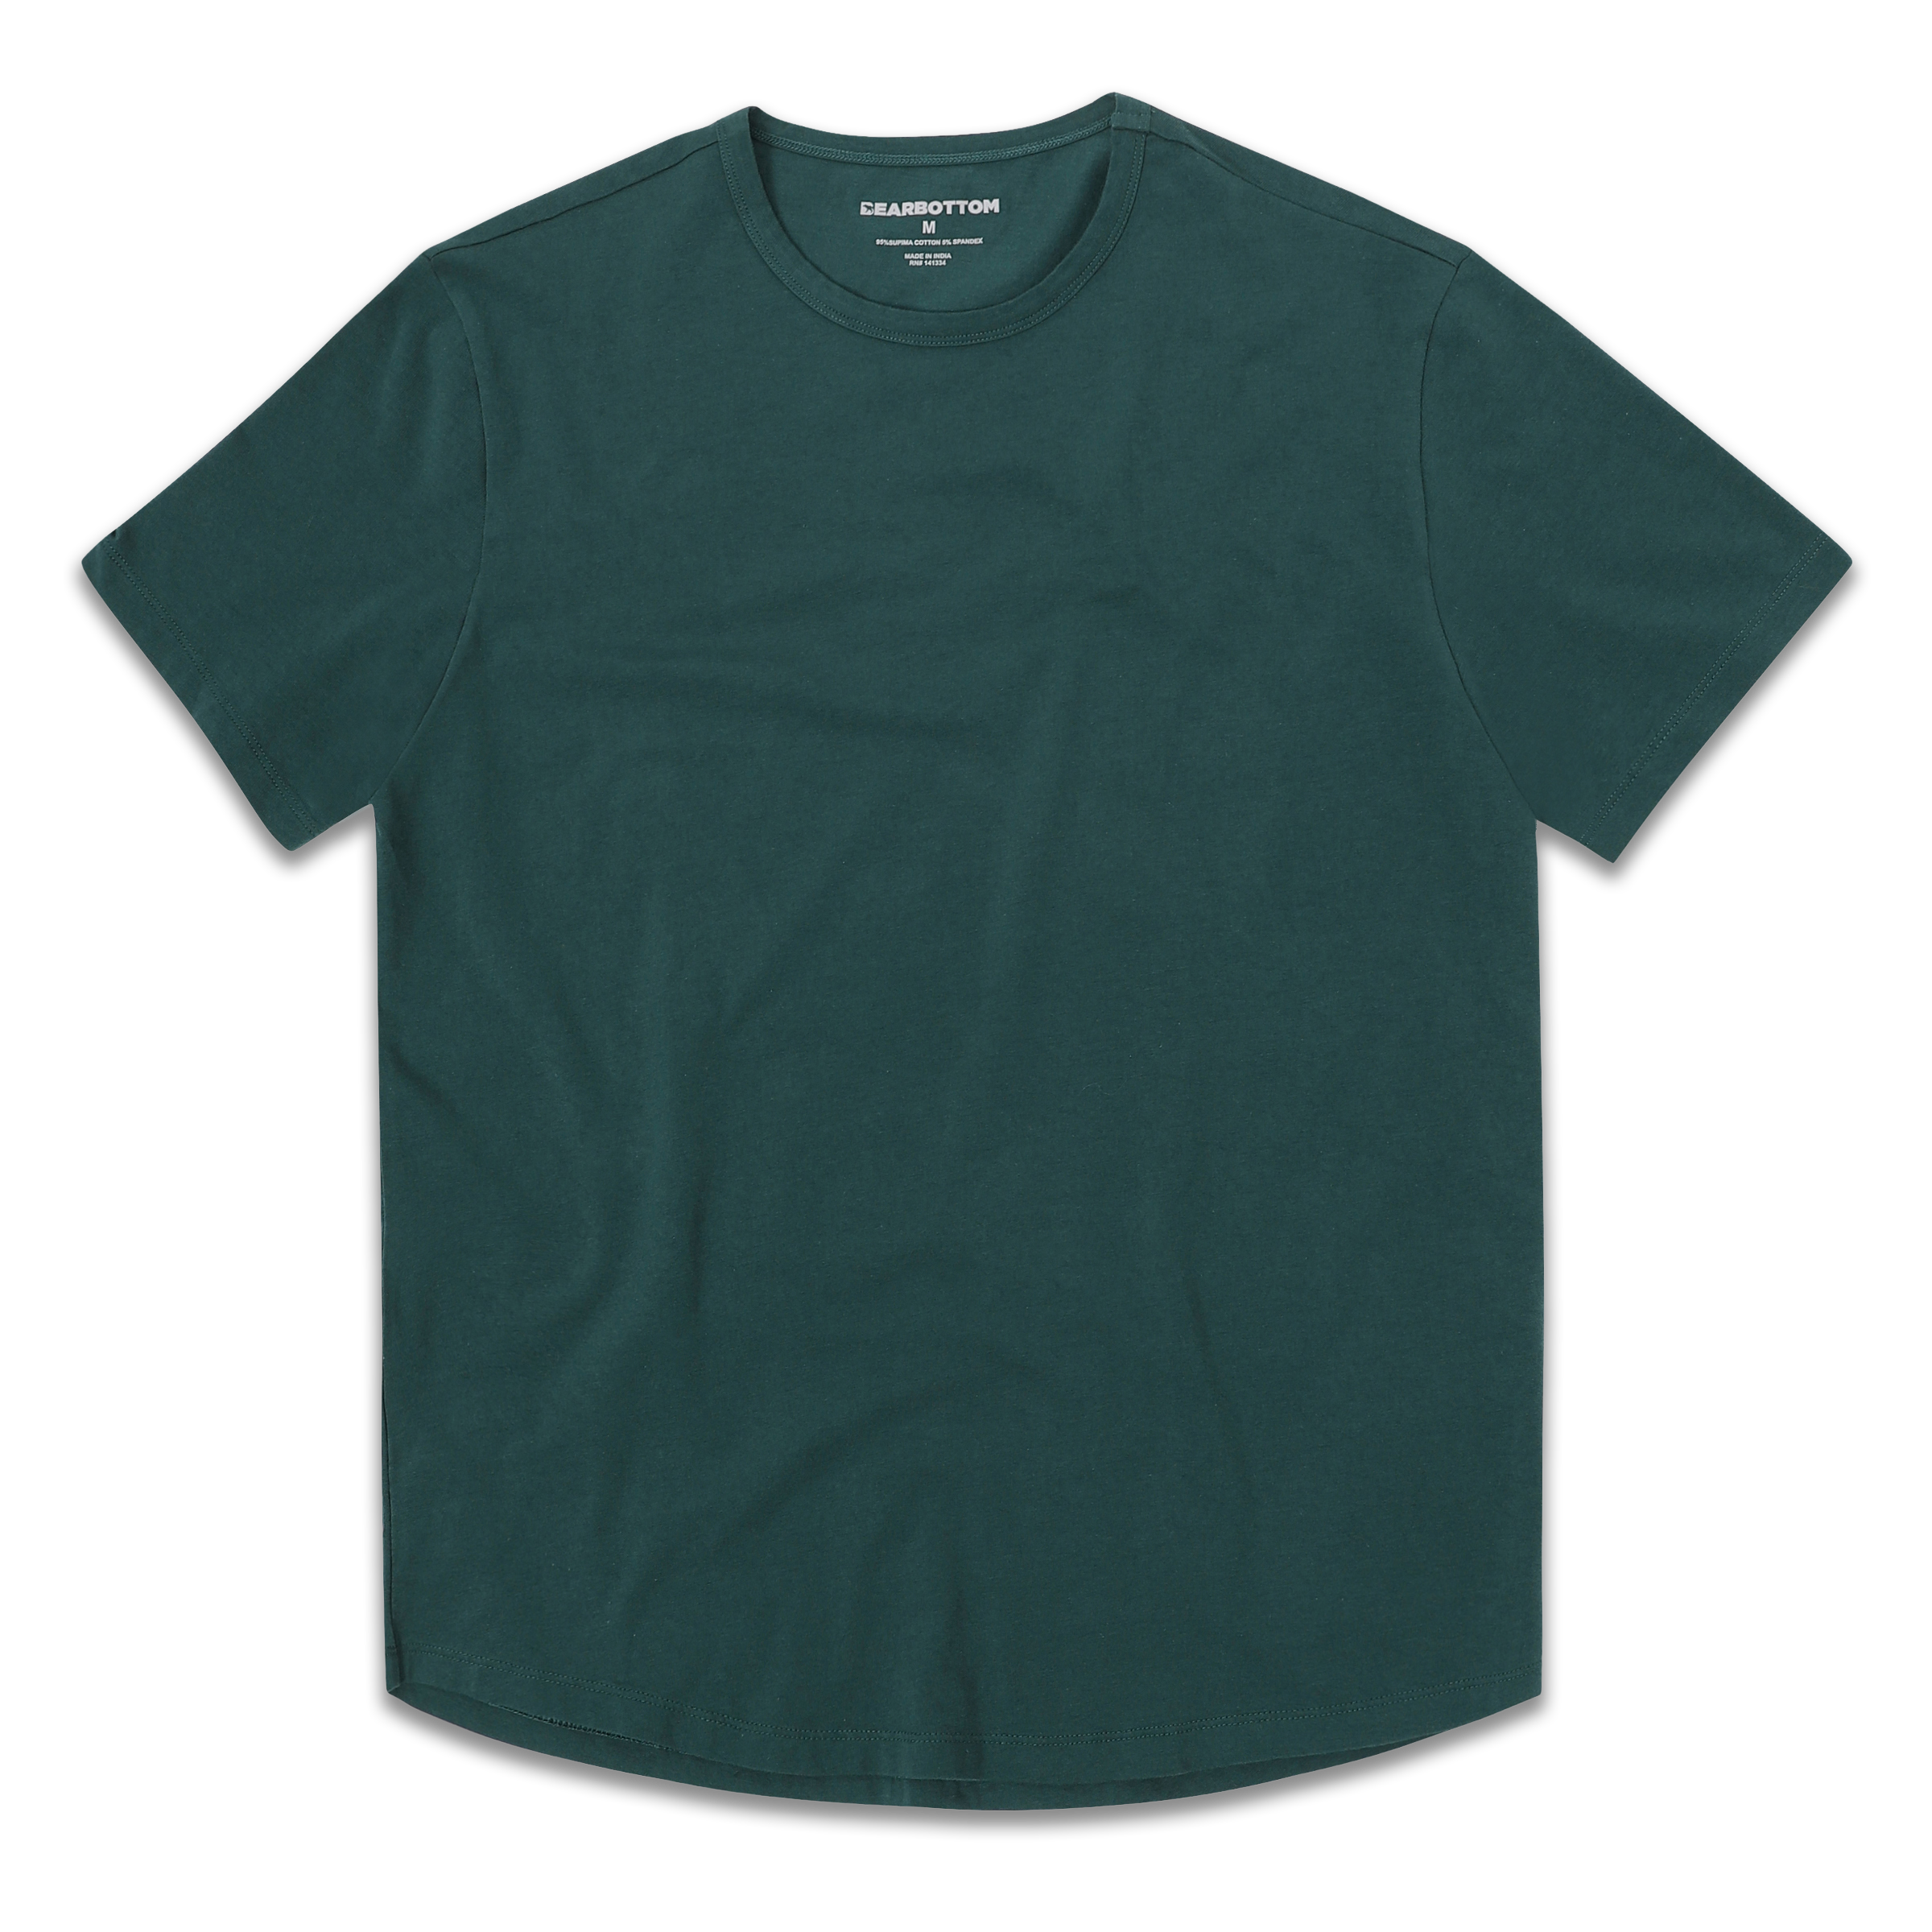 Supima Curved Tee Field Green front with crewneck, curved bottom hem, and short sleeves